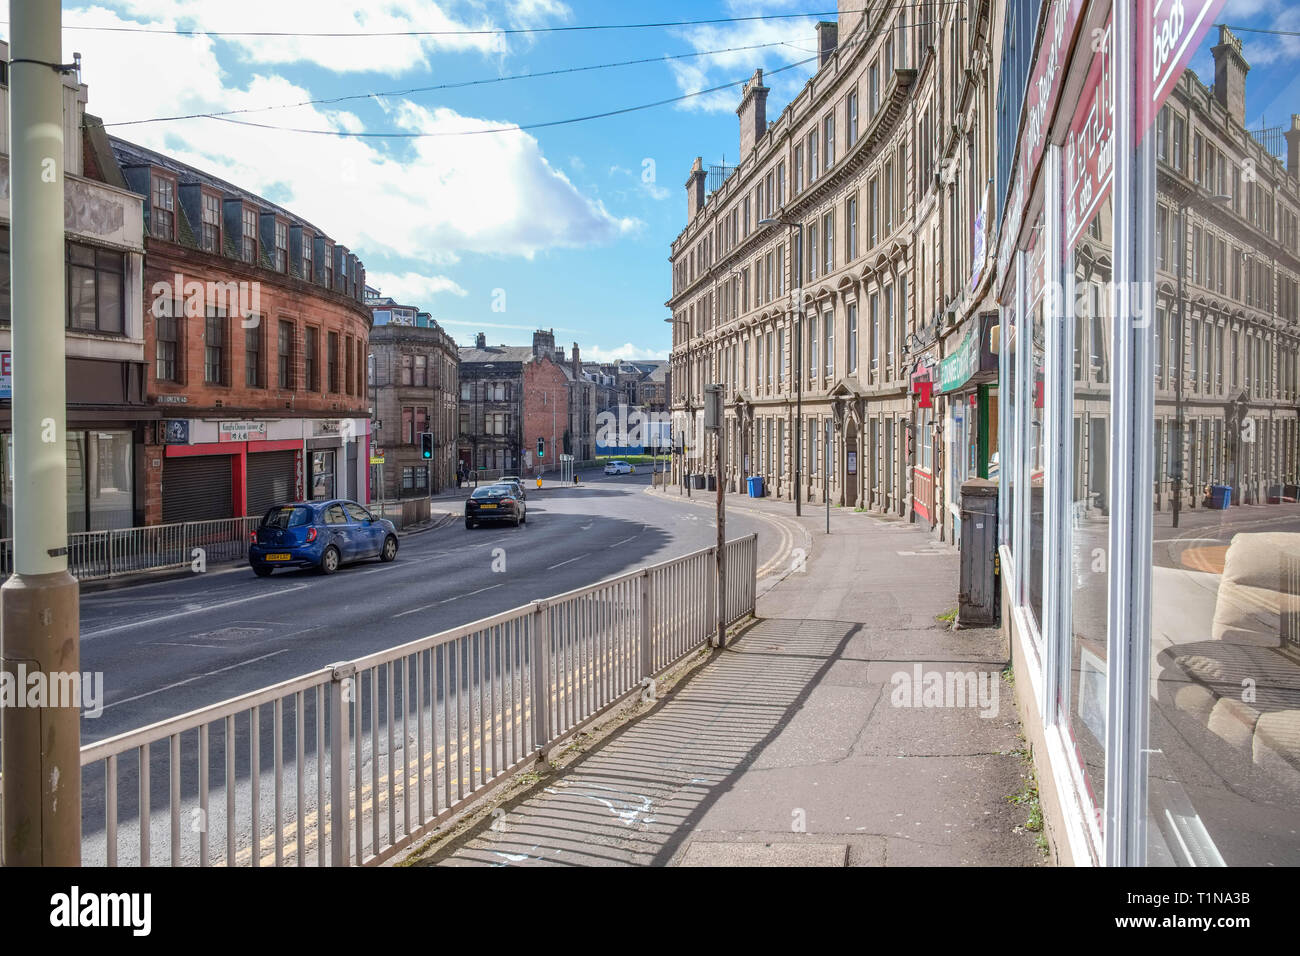 Dundee, Scotland, UK - March 23, 2019: Looking down Victoria Road in Dundee with its impressive traditional buildings situated in the old part of the  Stock Photo